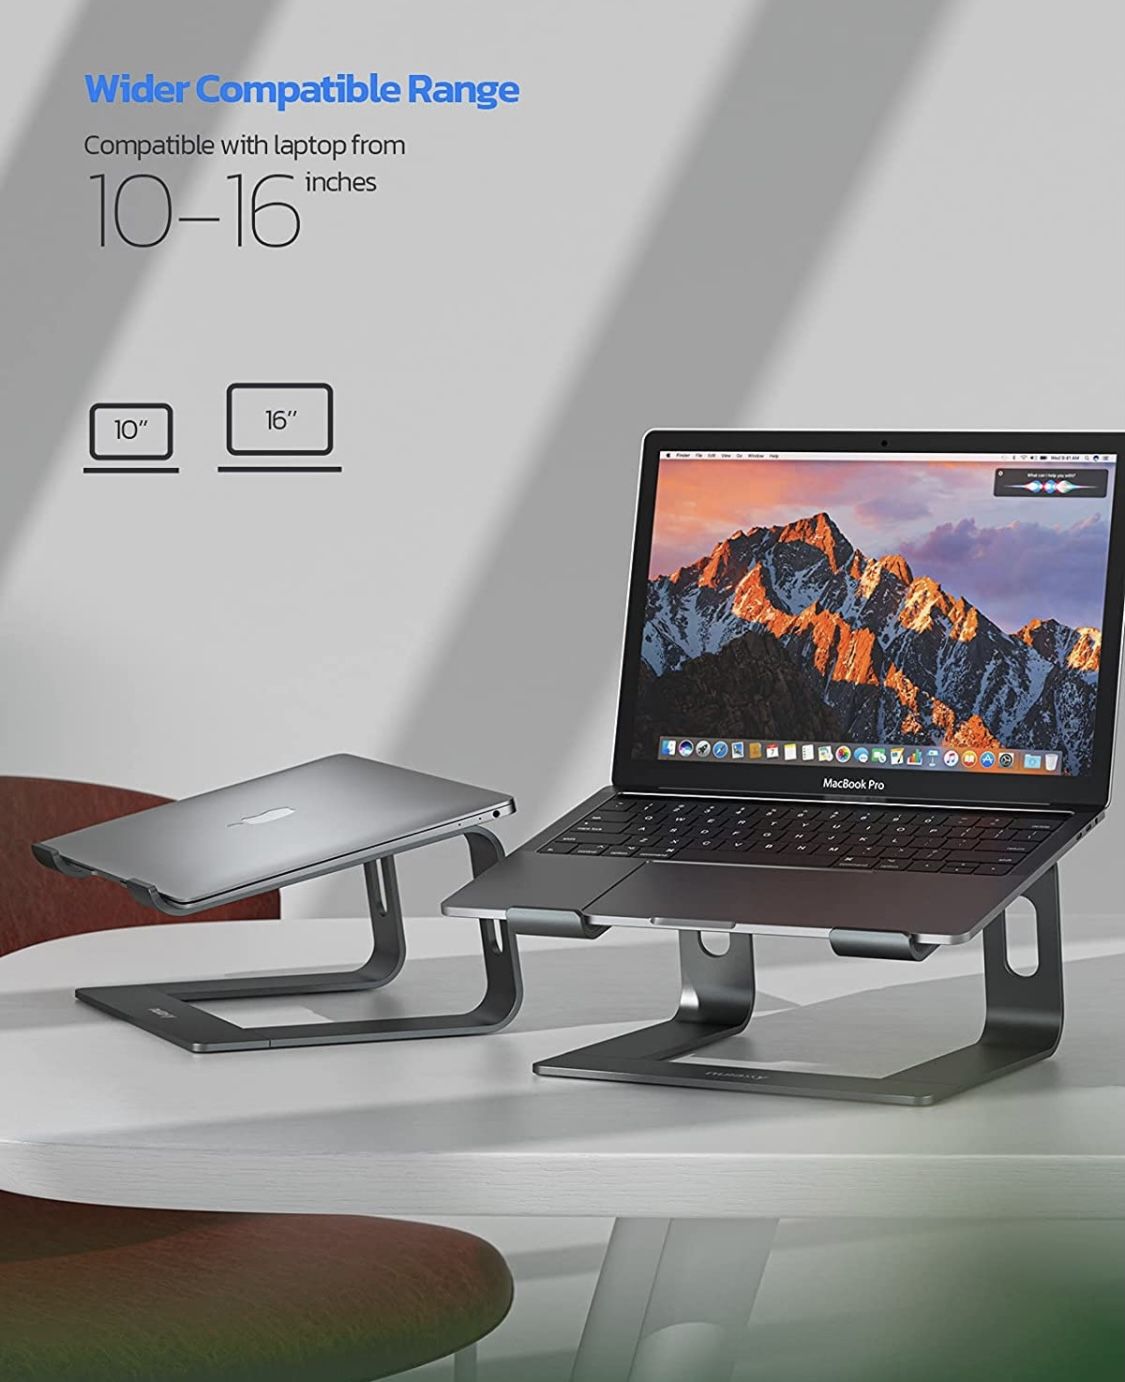 Nulaxy Laptop Stand $20